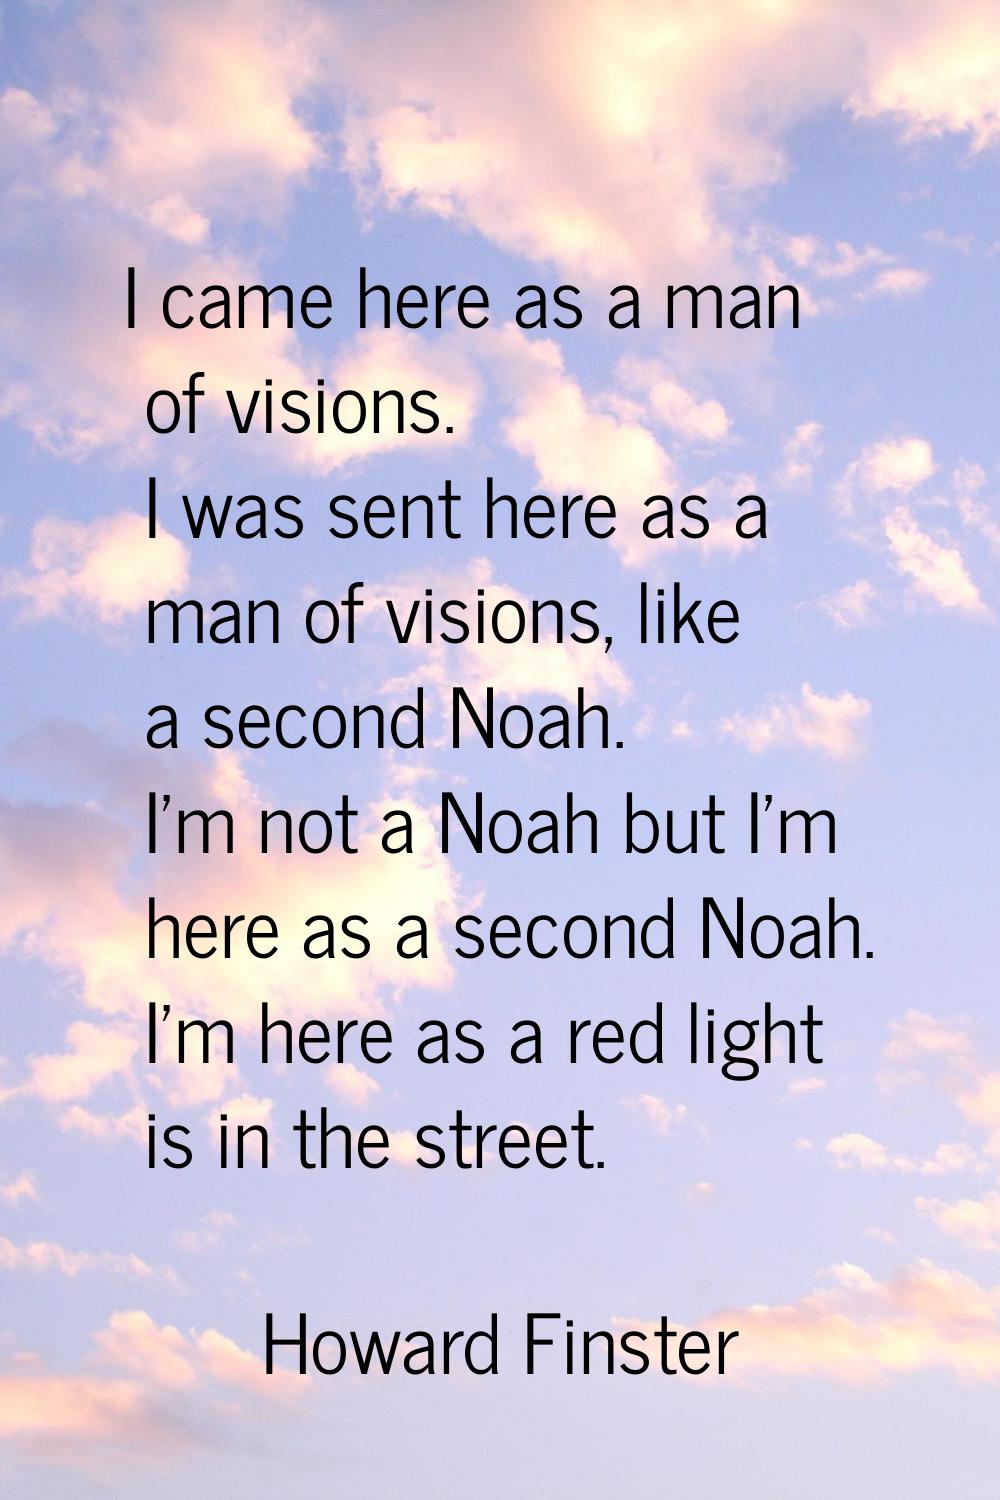 I came here as a man of visions. I was sent here as a man of visions, like a second Noah. I'm not a